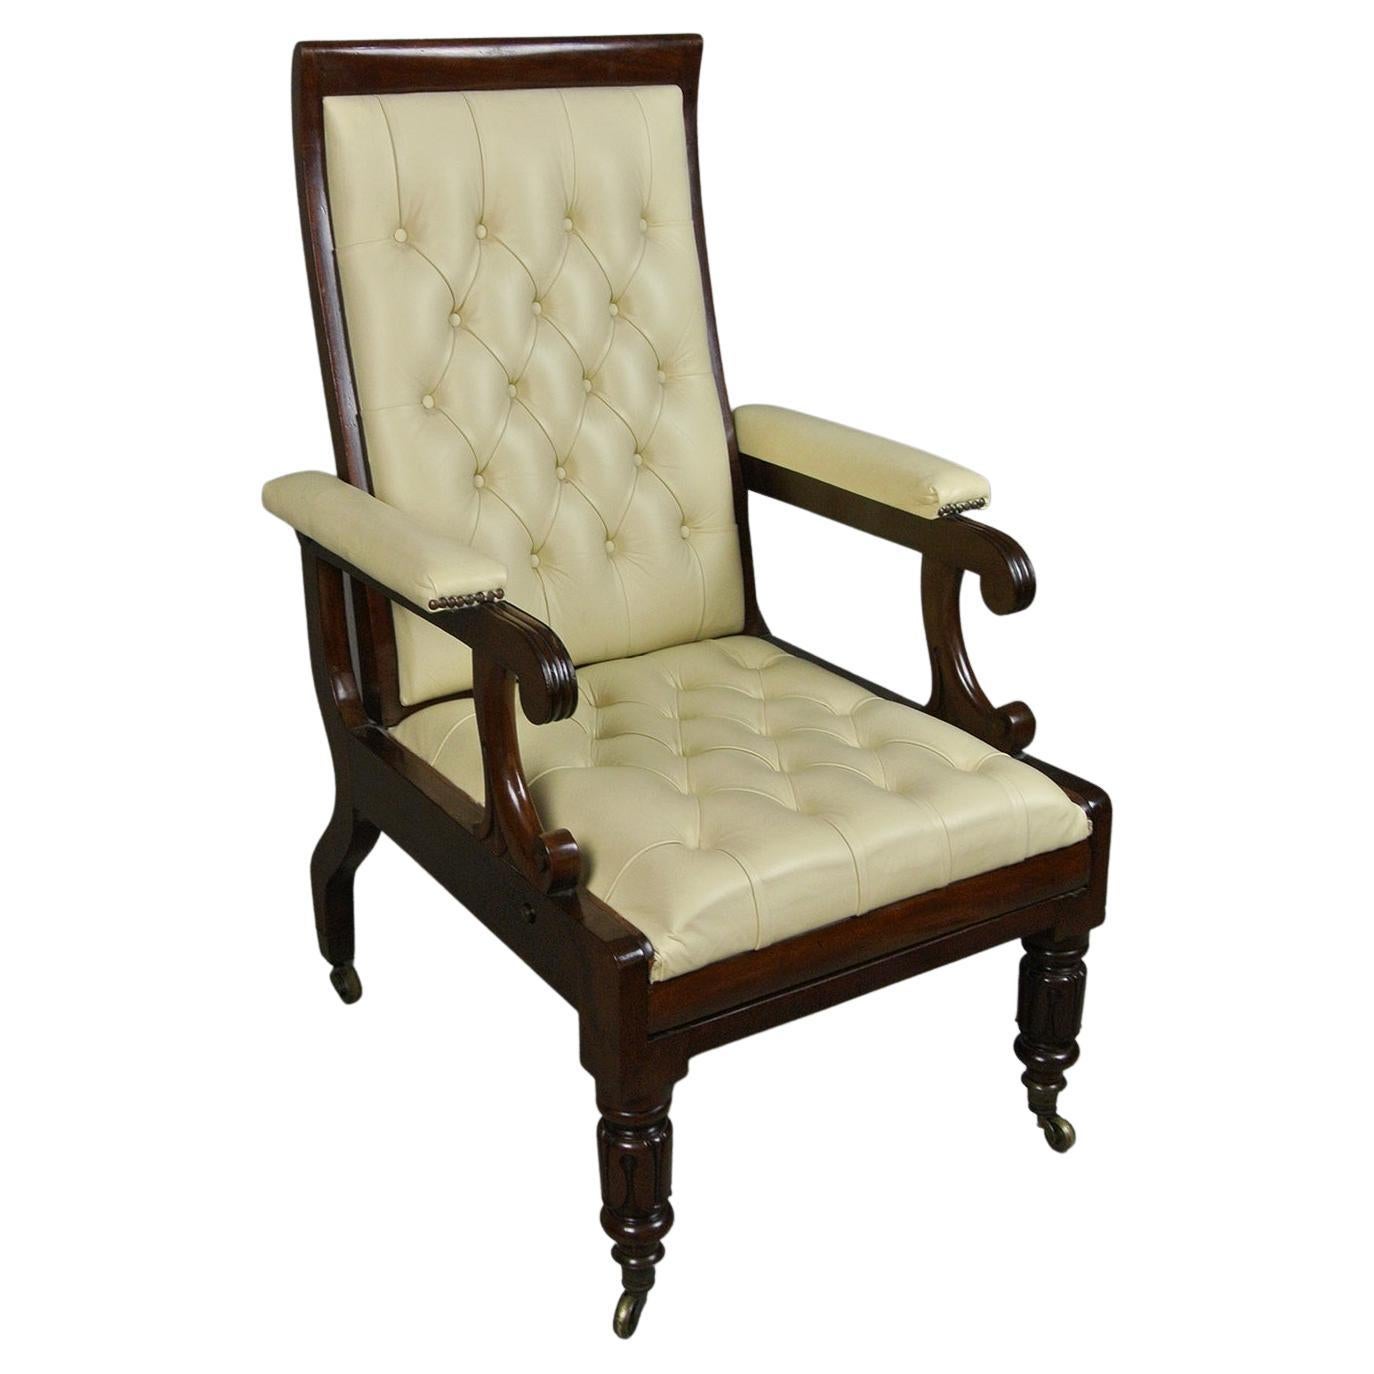 Regency Solid Mahogany ‘Daws Patent’ Reclining Chair c. 1830 For Sale